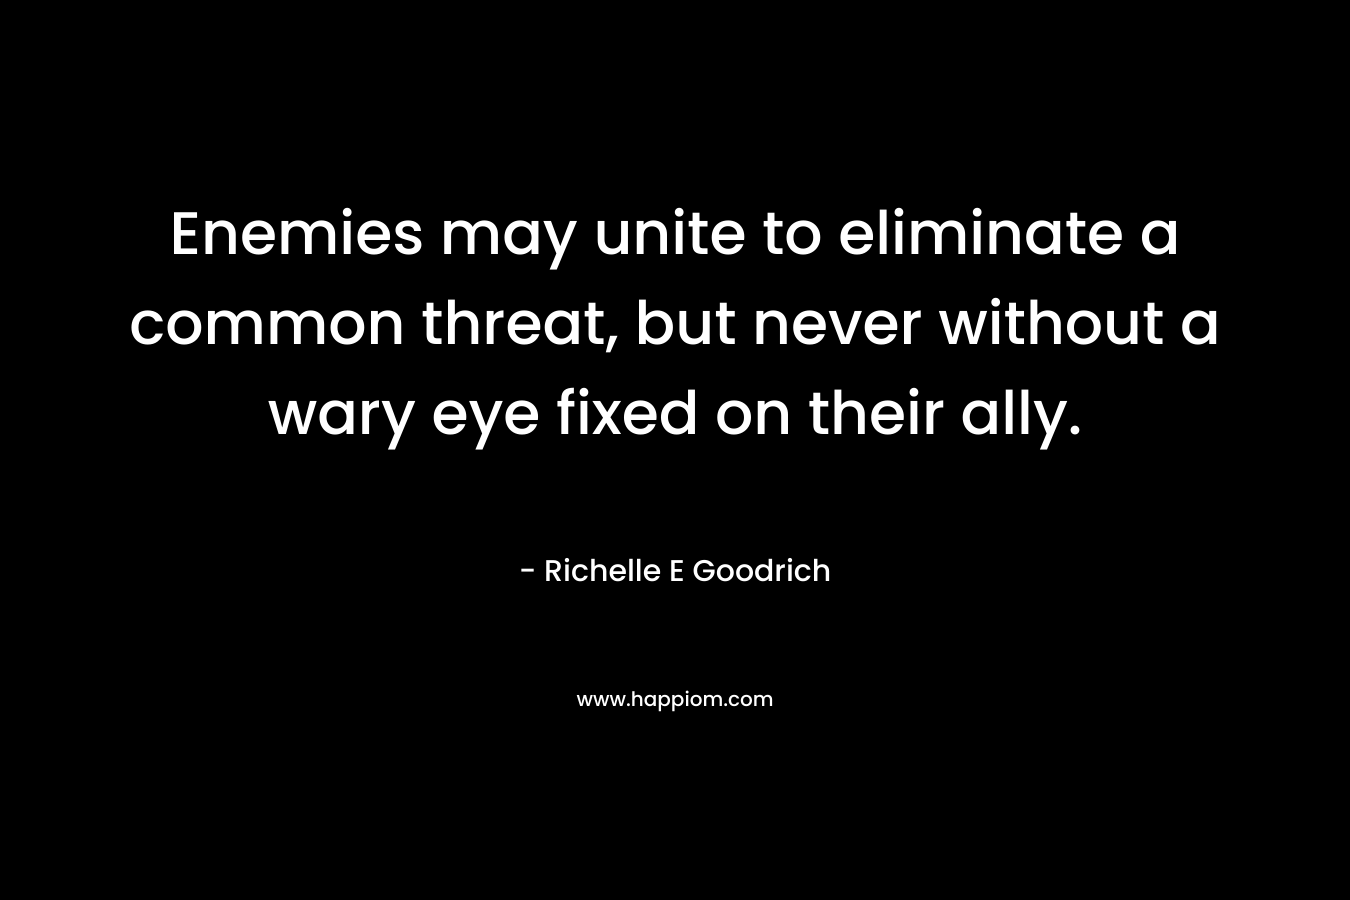 Enemies may unite to eliminate a common threat, but never without a wary eye fixed on their ally. – Richelle E Goodrich